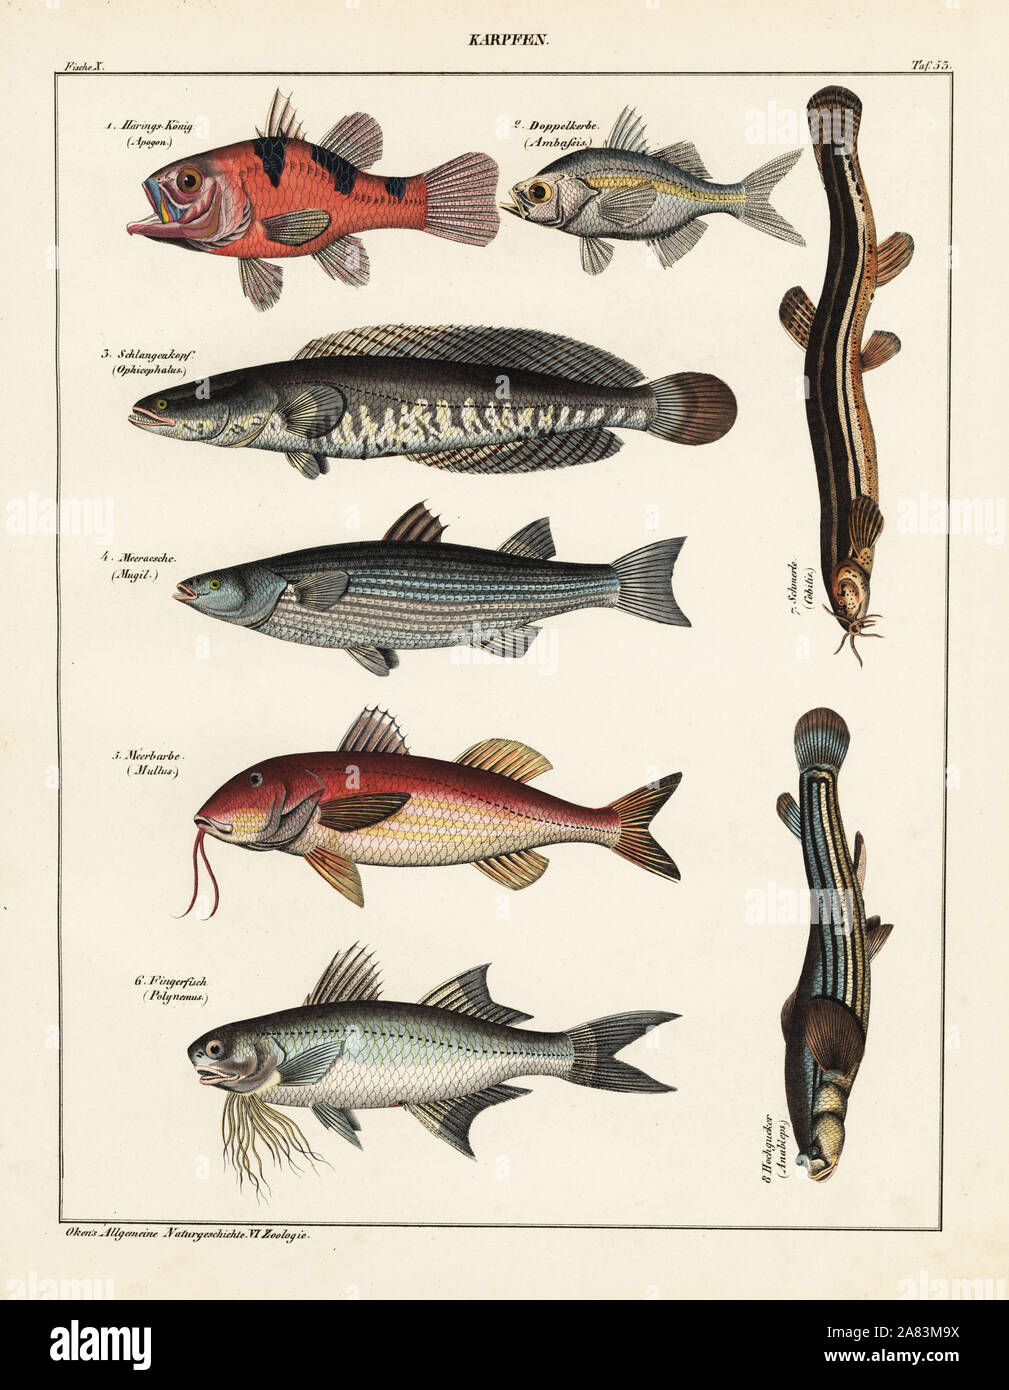 Flame cardinalfish, Apogon, Commerson's glassy, Ambassis ambassis, snakehead, Channa asiatica, mullet, Mugil species, red mullet, Mullus barbatus, threadfin, Polynemus species, spined loach, Cobitis taenia and foureyed fish, Anableps anableps. Lithograph from Lorenz Oken's Universal Natural History, Allgemeine Naturgeschichte fur alle Stande, Stuttgart, 1841. Stock Photo